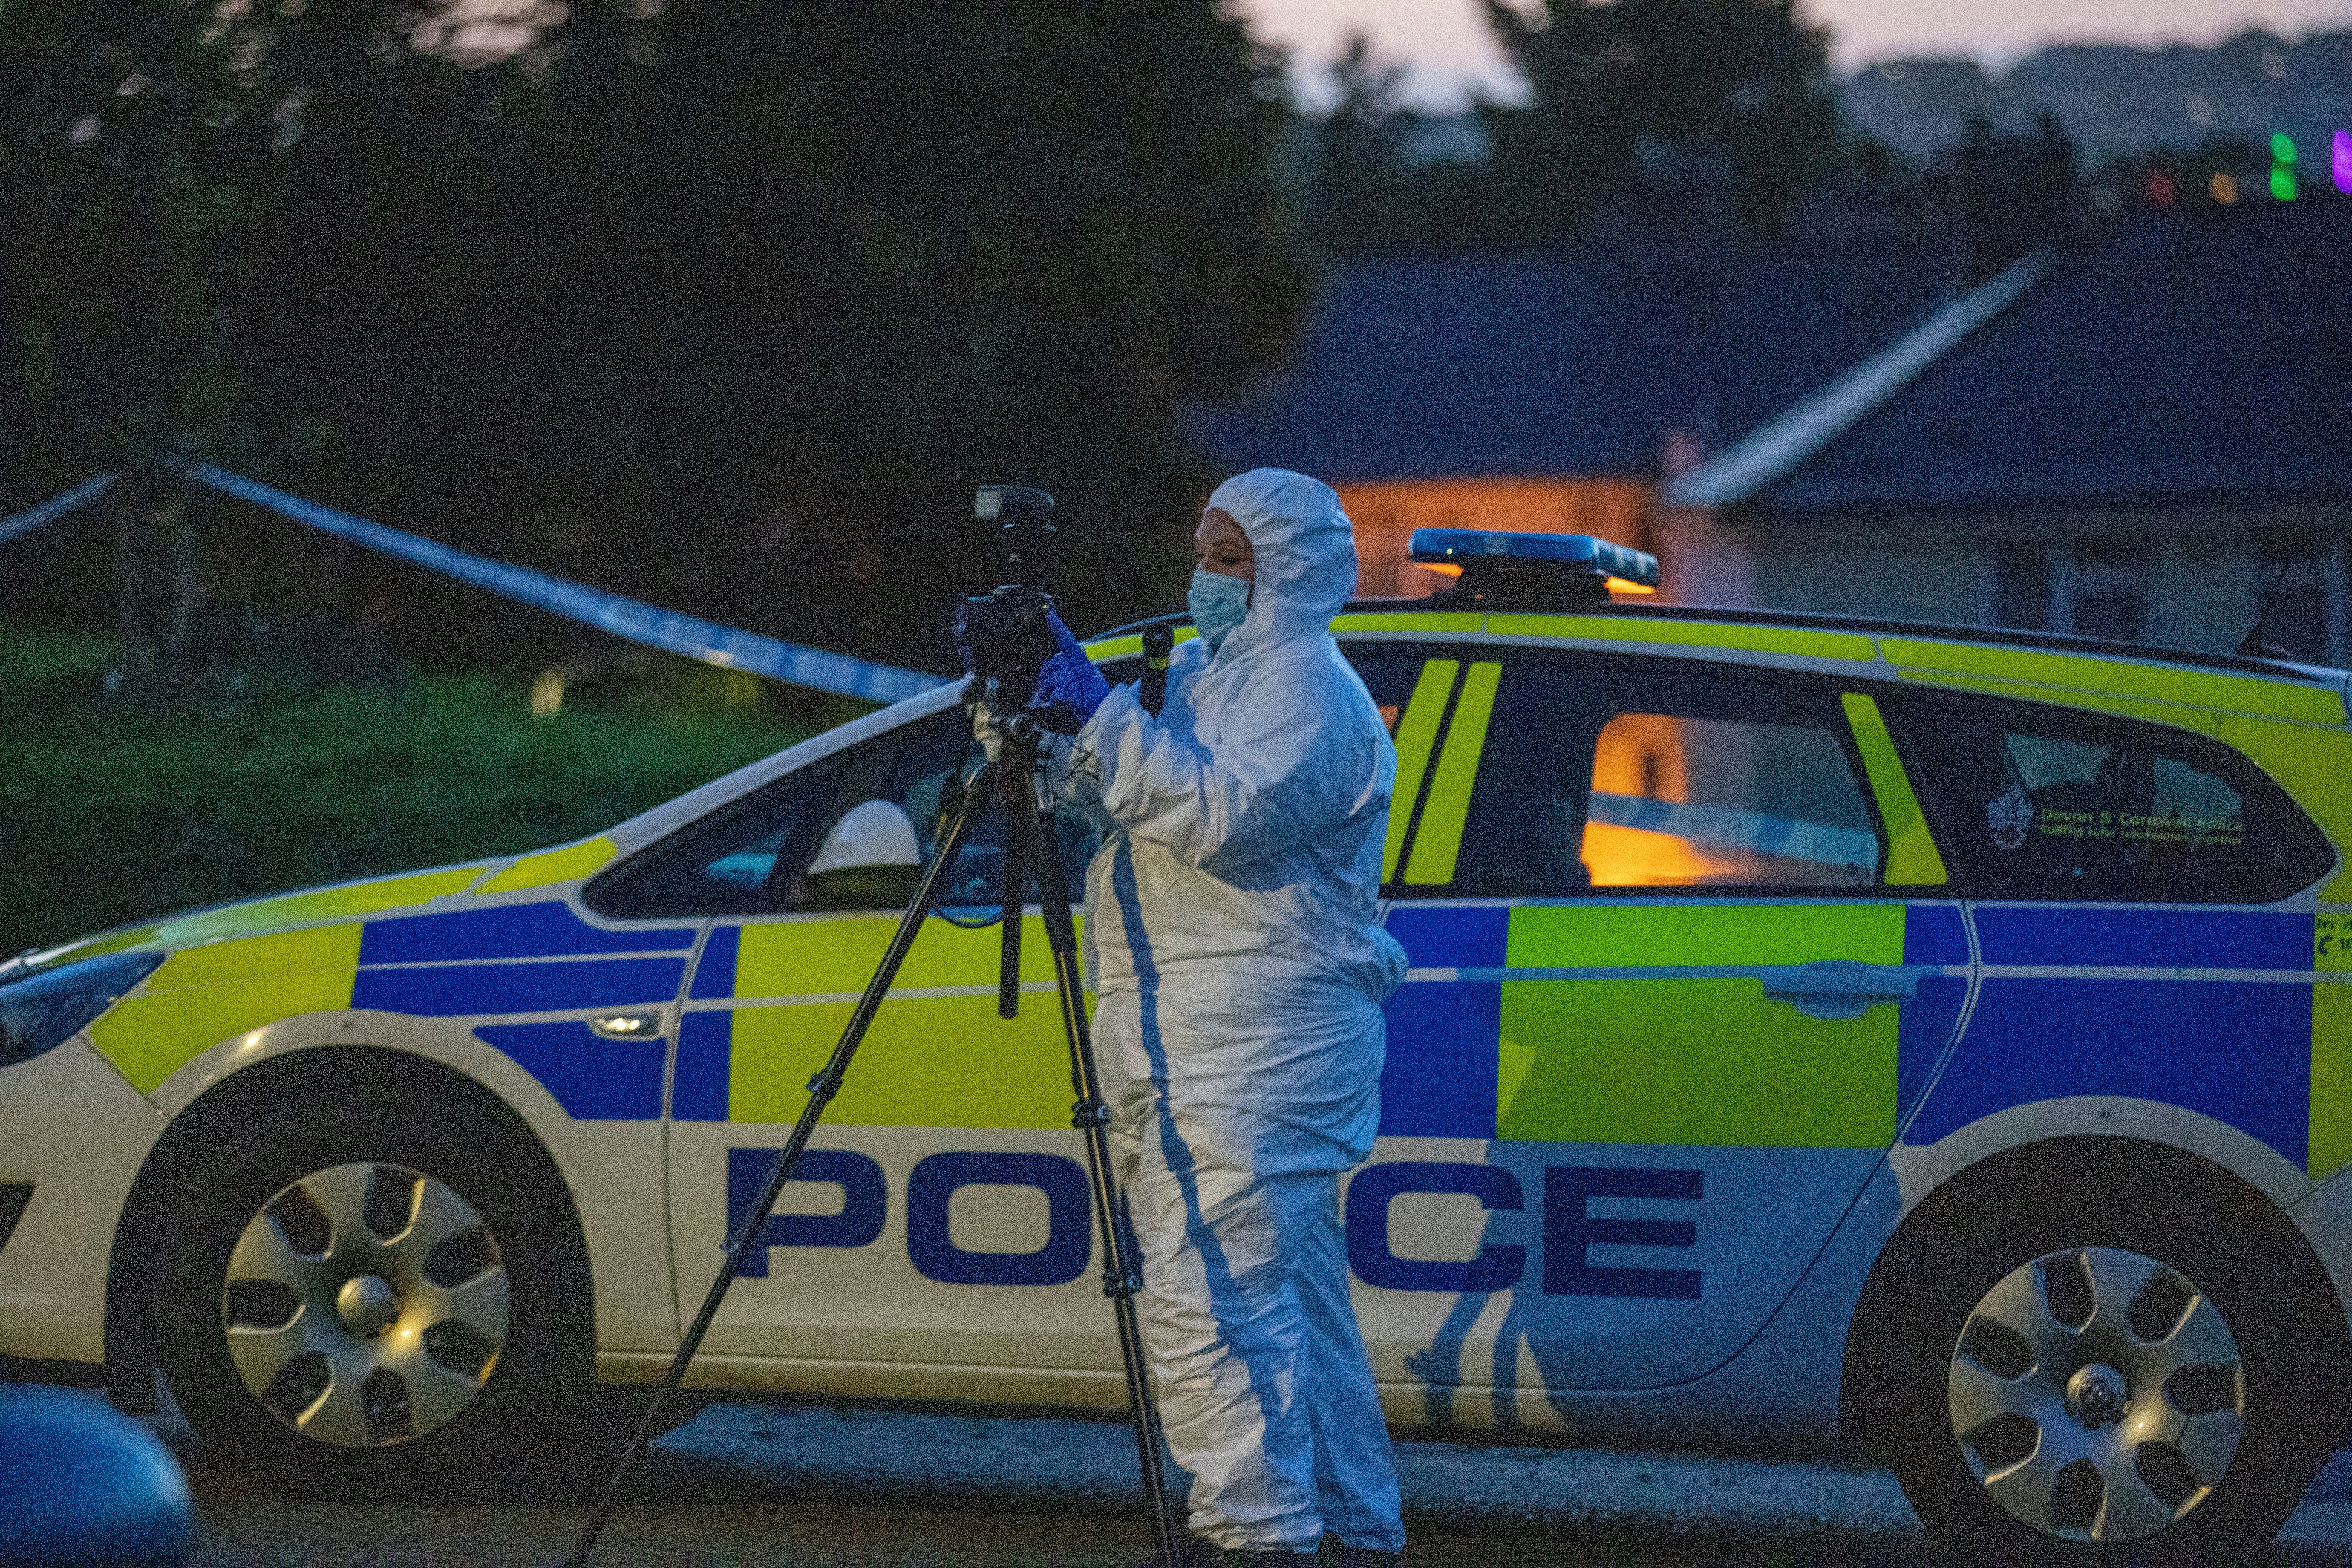 Police were called to a serious firearms incident in the Keyham area of Plymouth, UK on Thursday.